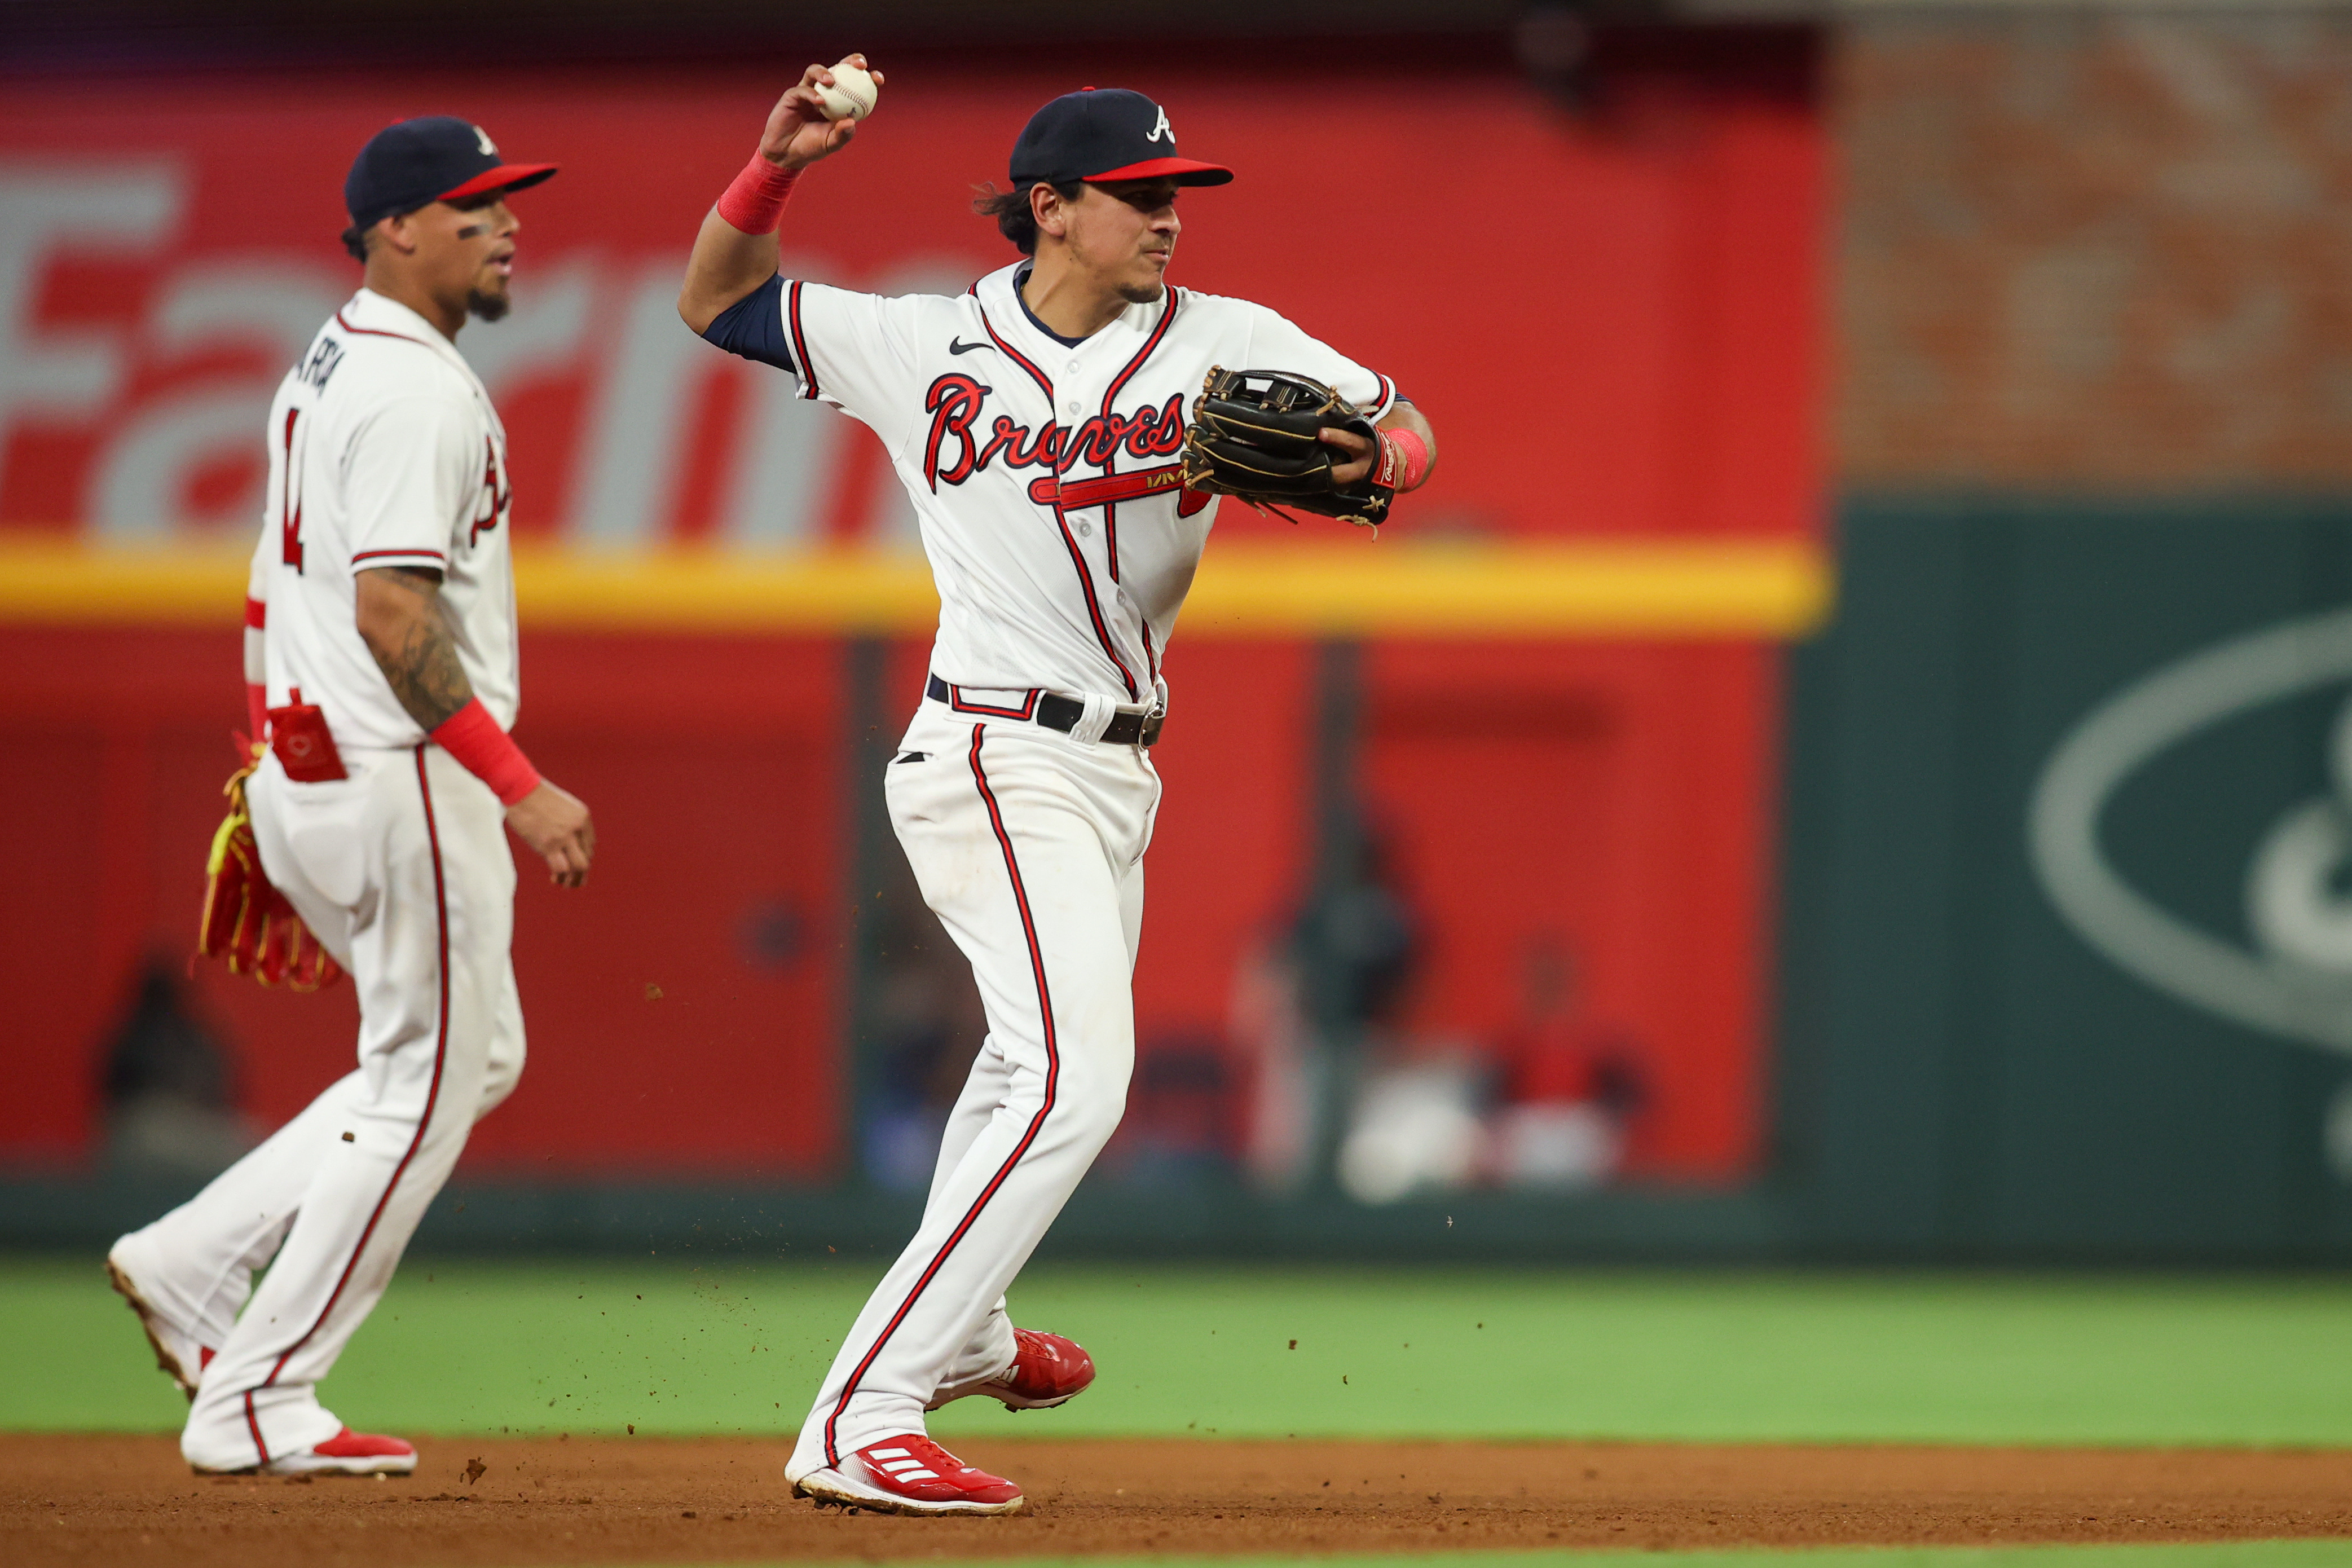 Braves complete sweep as Yankees end brutal road trip with sub